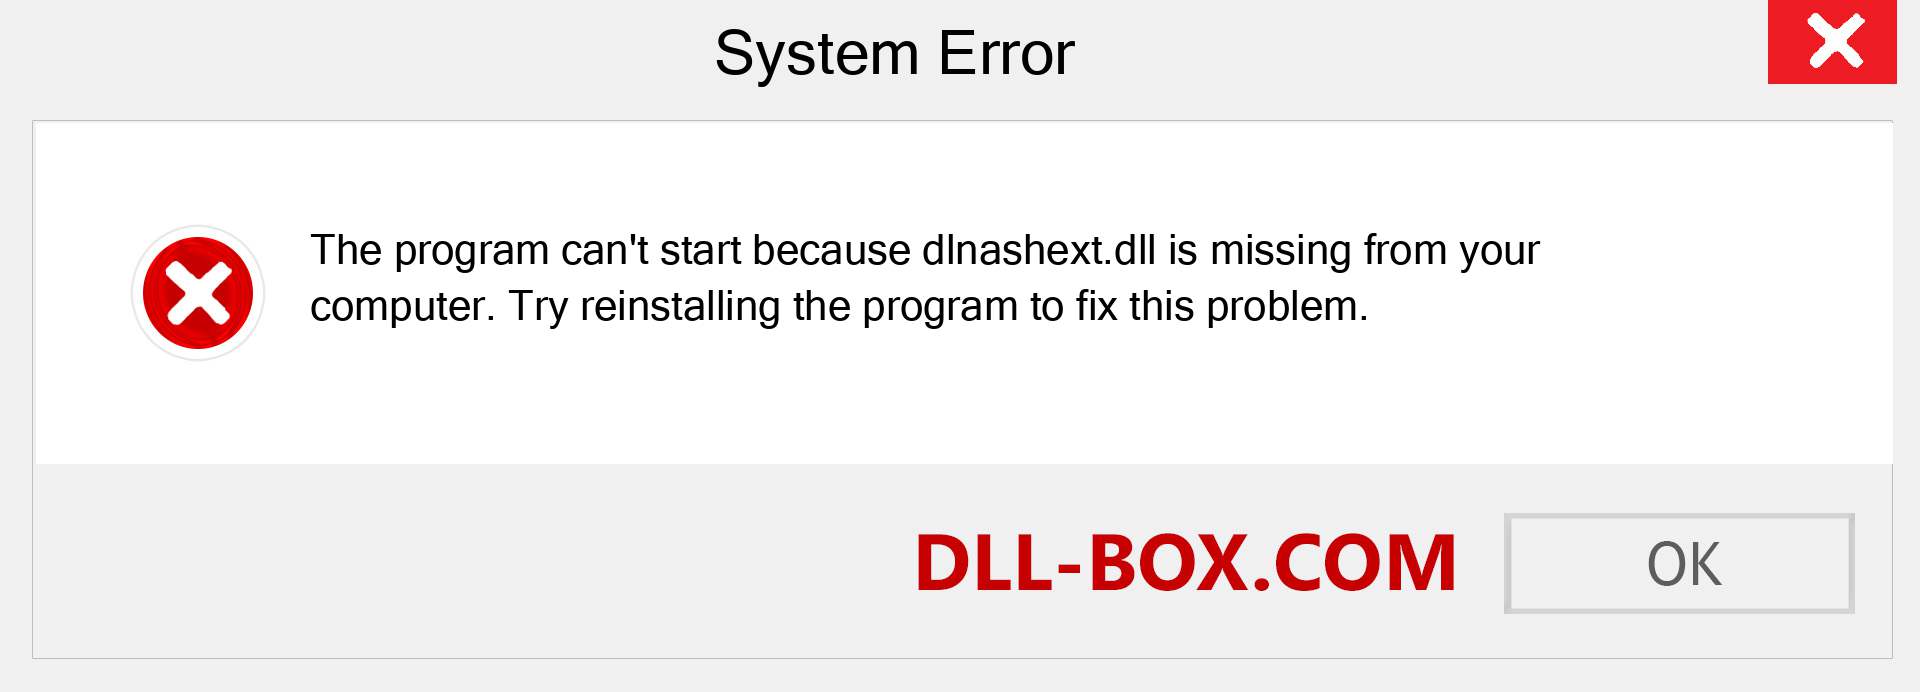  dlnashext.dll file is missing?. Download for Windows 7, 8, 10 - Fix  dlnashext dll Missing Error on Windows, photos, images